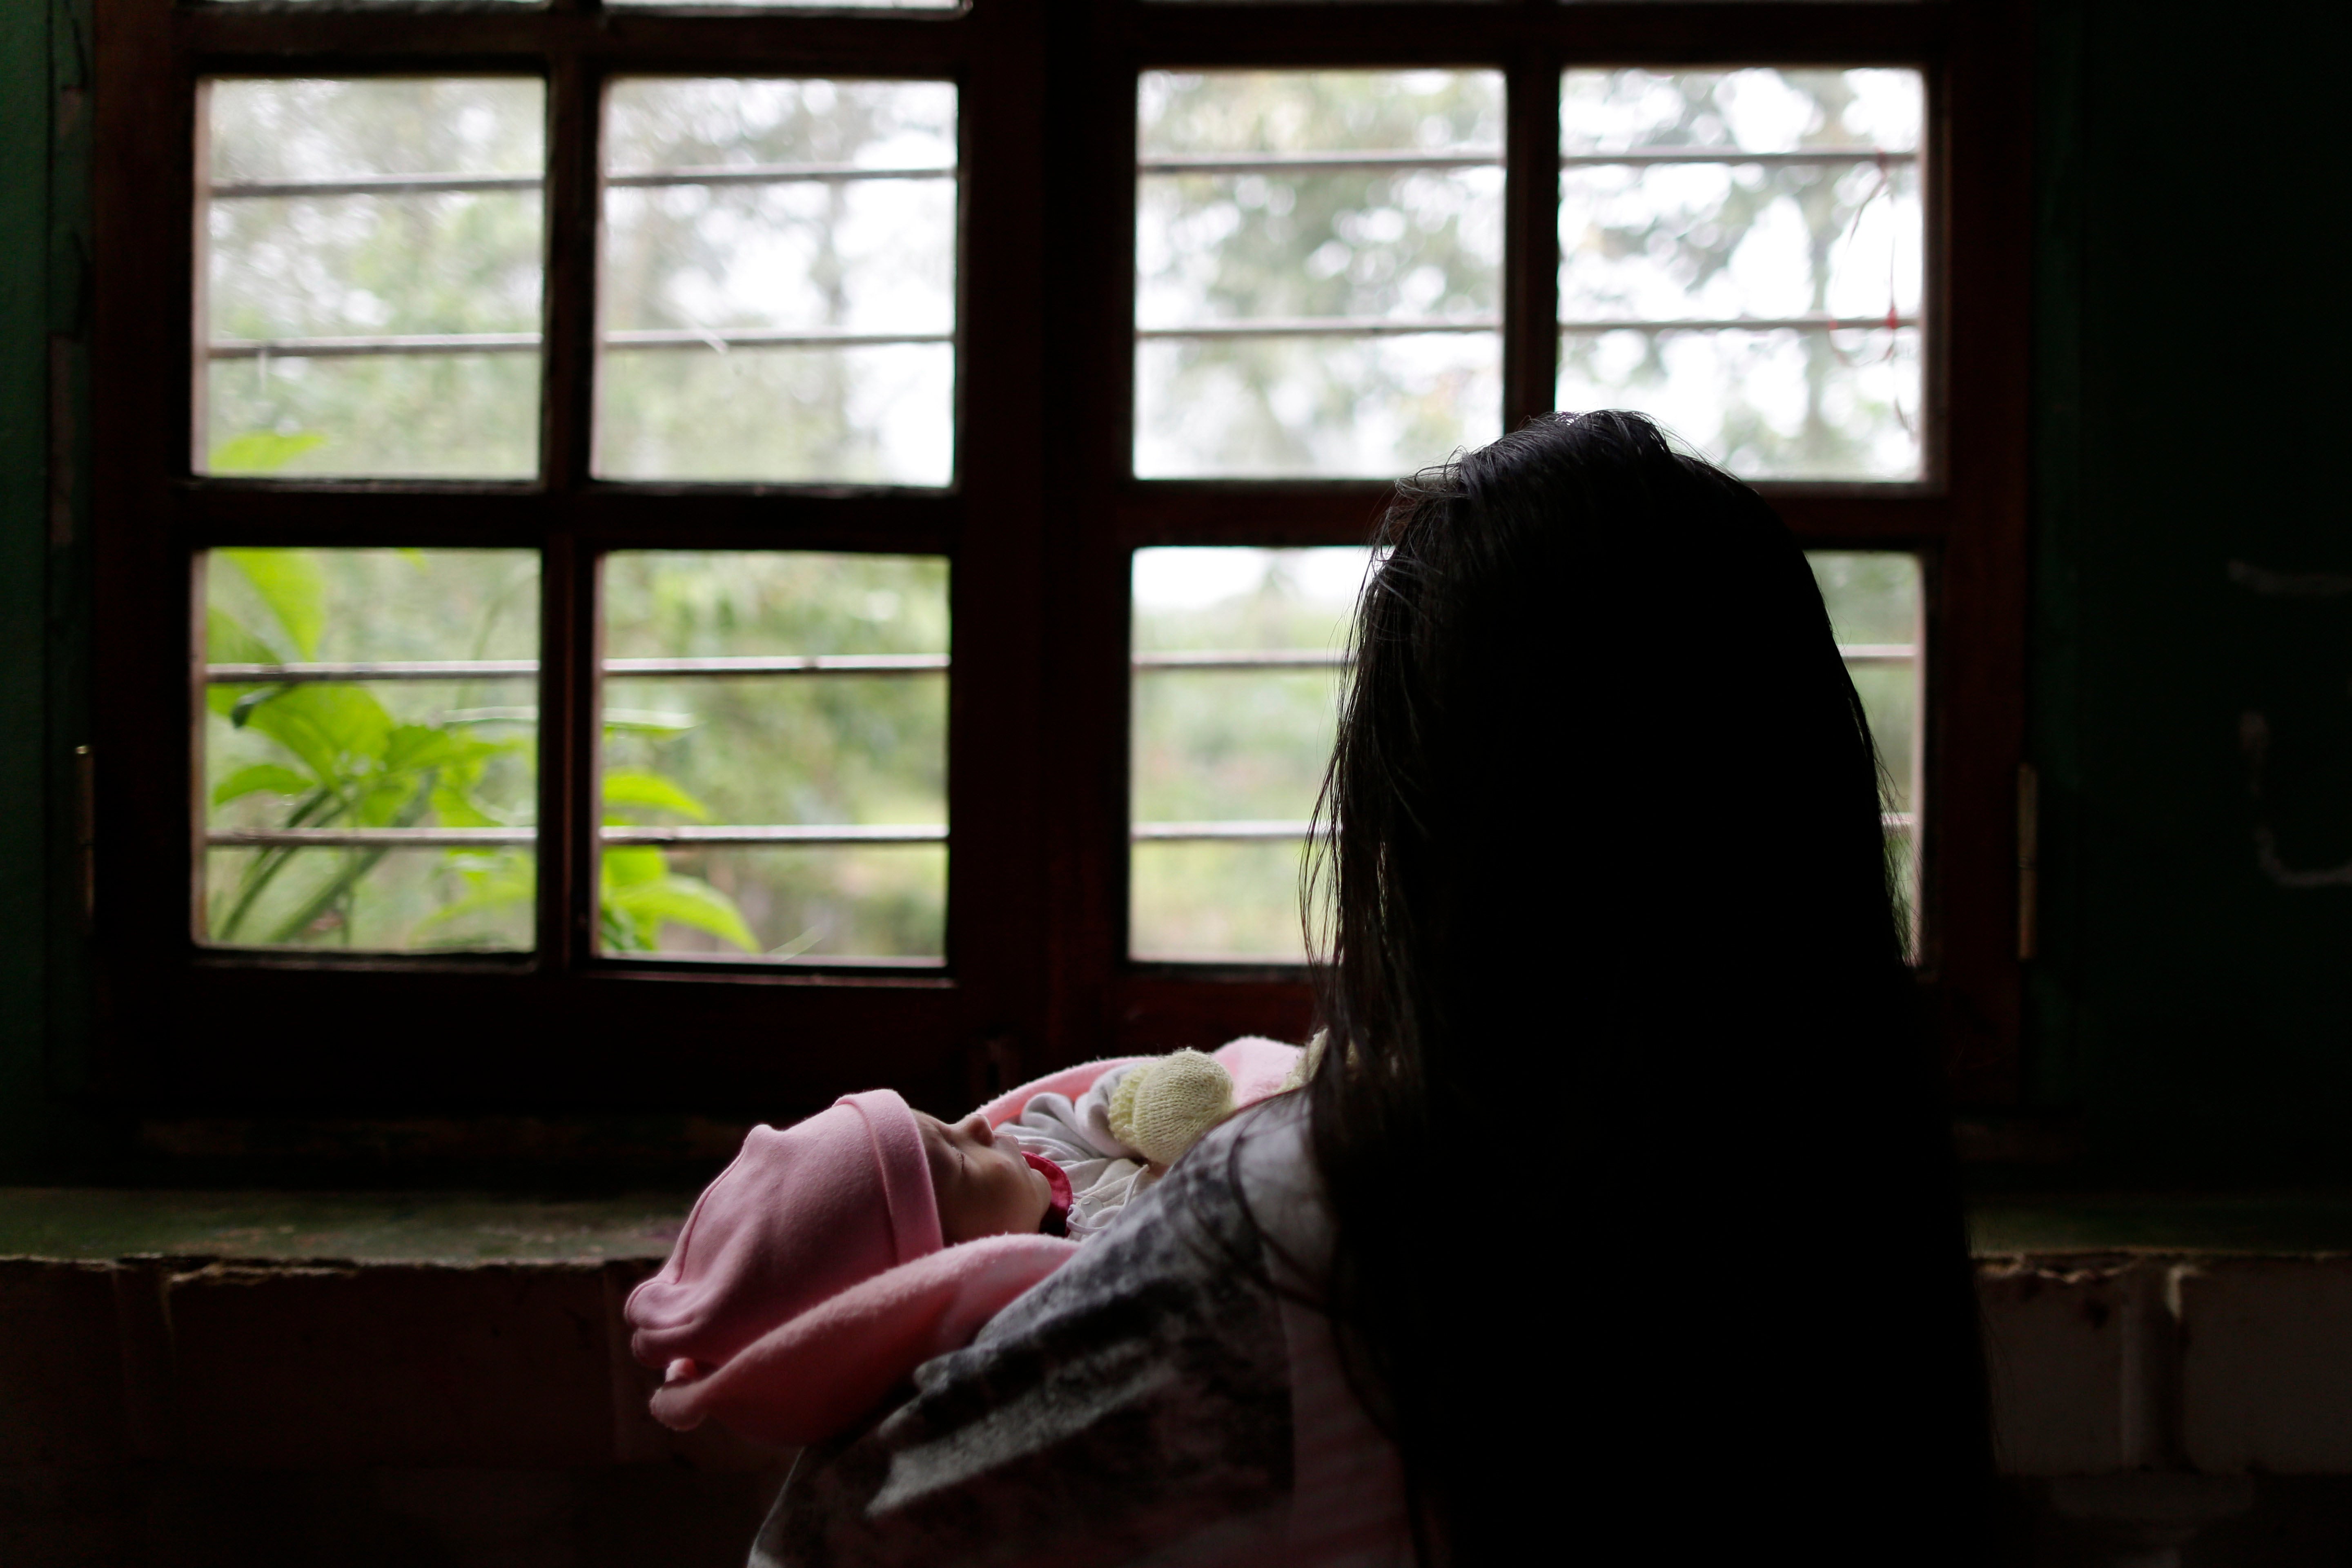 A 13-year-old girl victim of rape in a separate case holds her one-month old baby at a shelter in Ciudad del Este, Paraguay, on May 14, 2015.